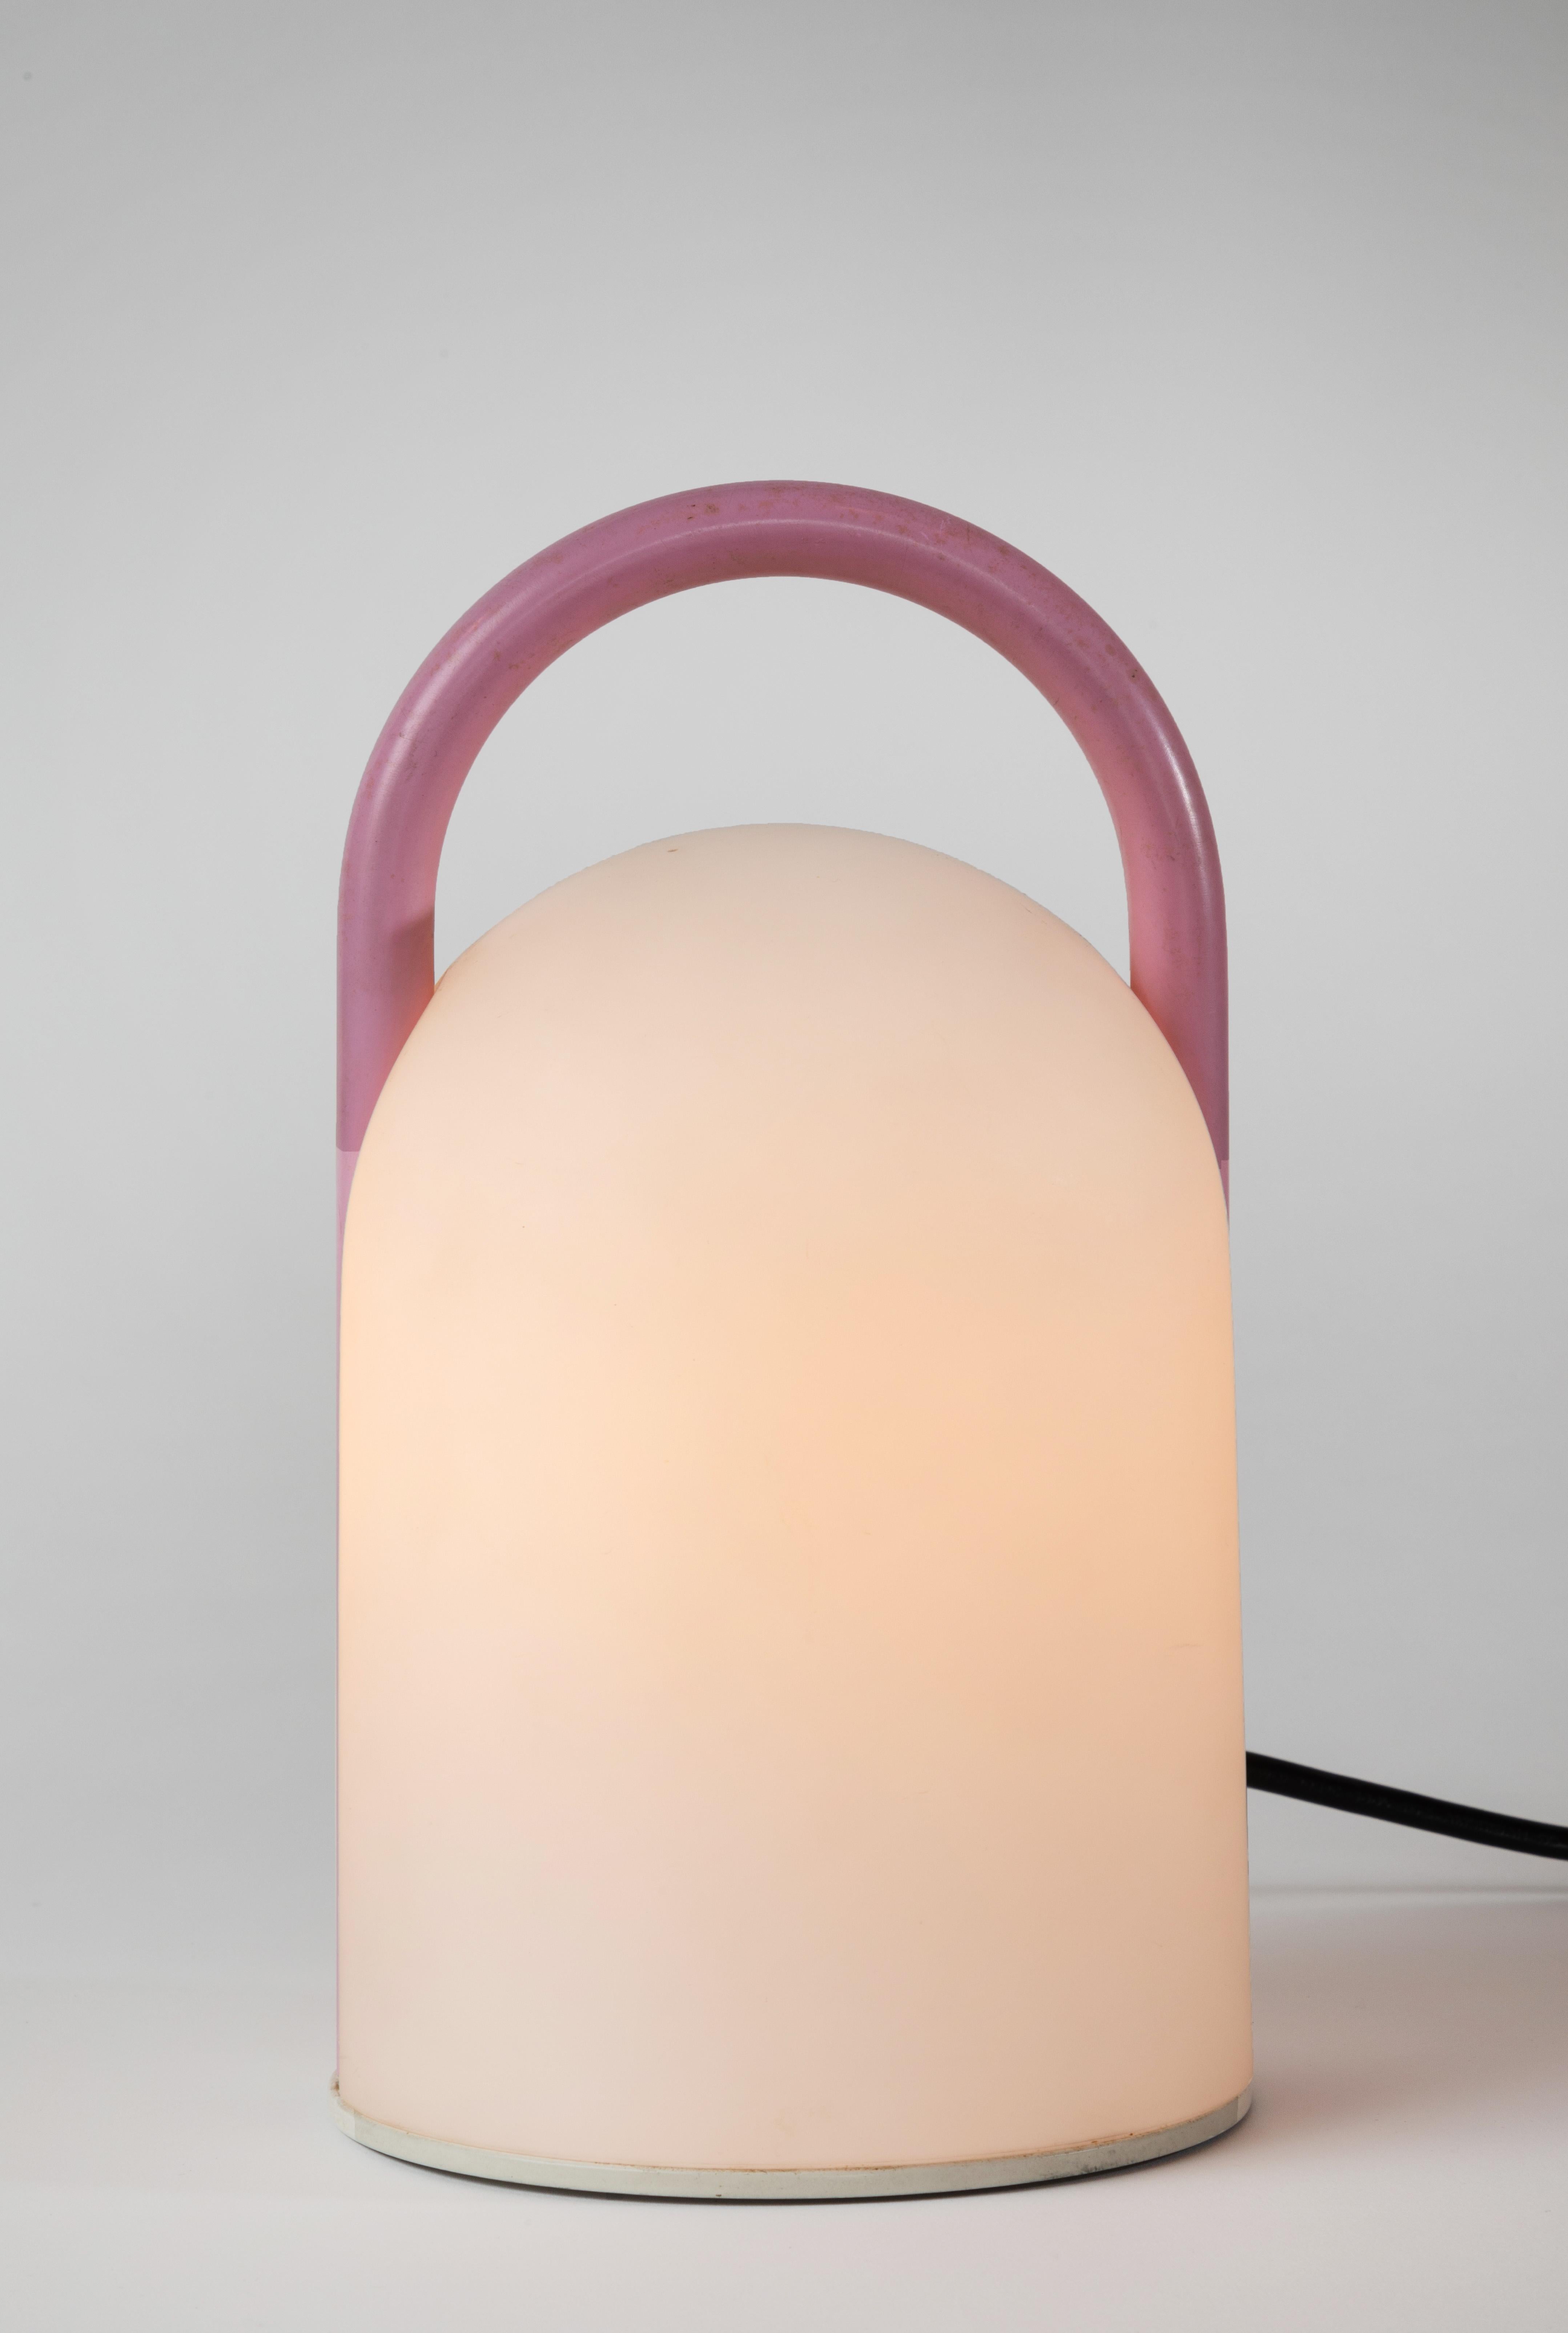 1980s Romolo Lanciani 'Tender' glass table lamp for Tronconi. Executed in opaline glass and rare pink/mauve enameled metal finish, Italy, circa 1980s.

Tronconi was a major Italian lighting and design company founded by Enrico Tronconi. Previously